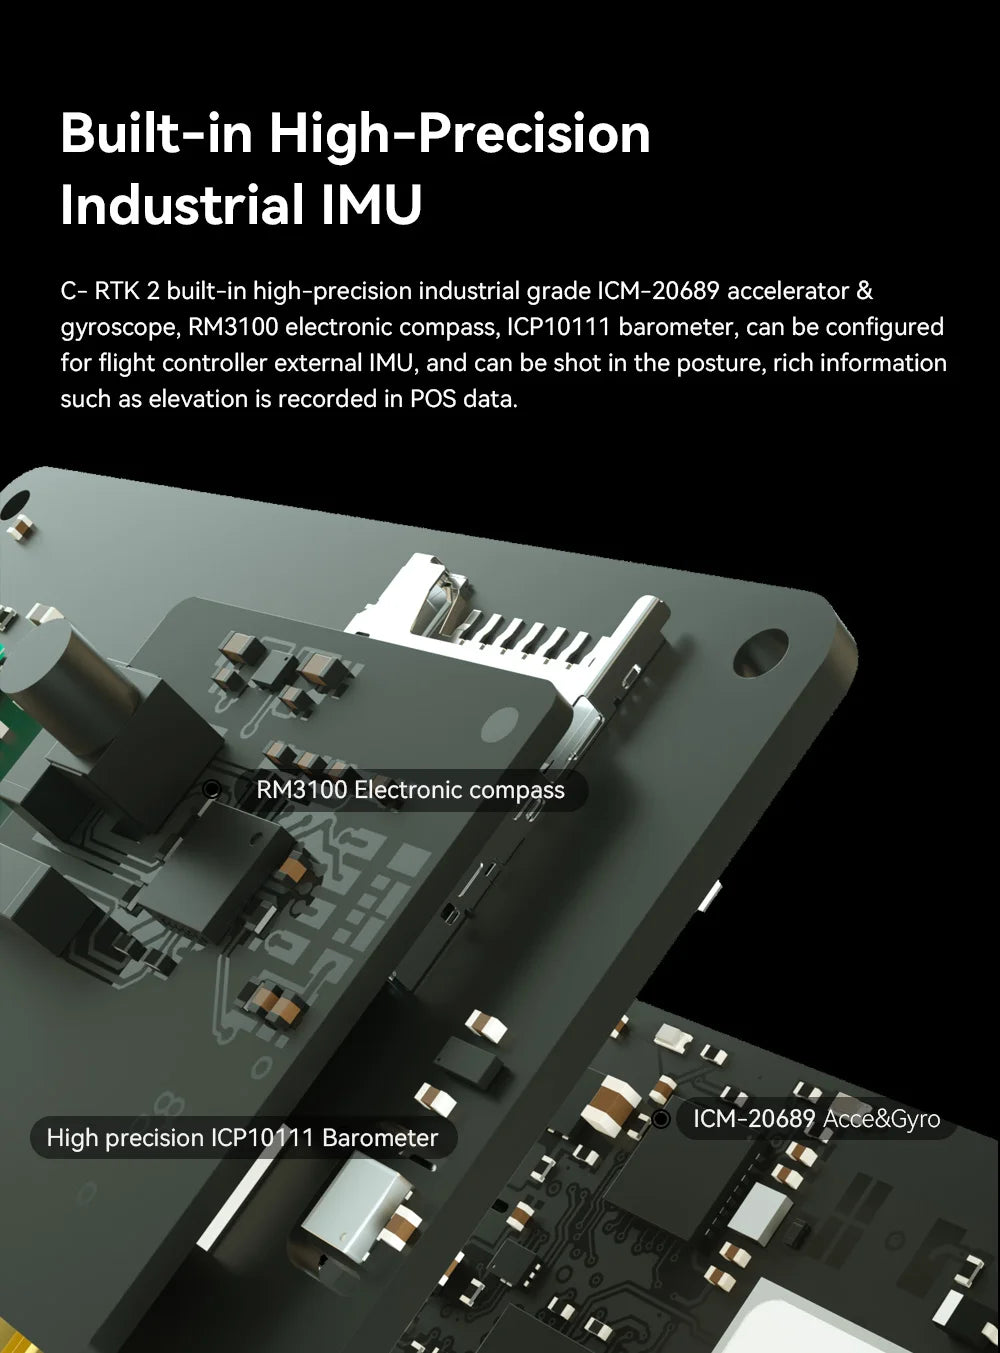 built-in high-precision industrial grade IMU can be configured for flight controller external I